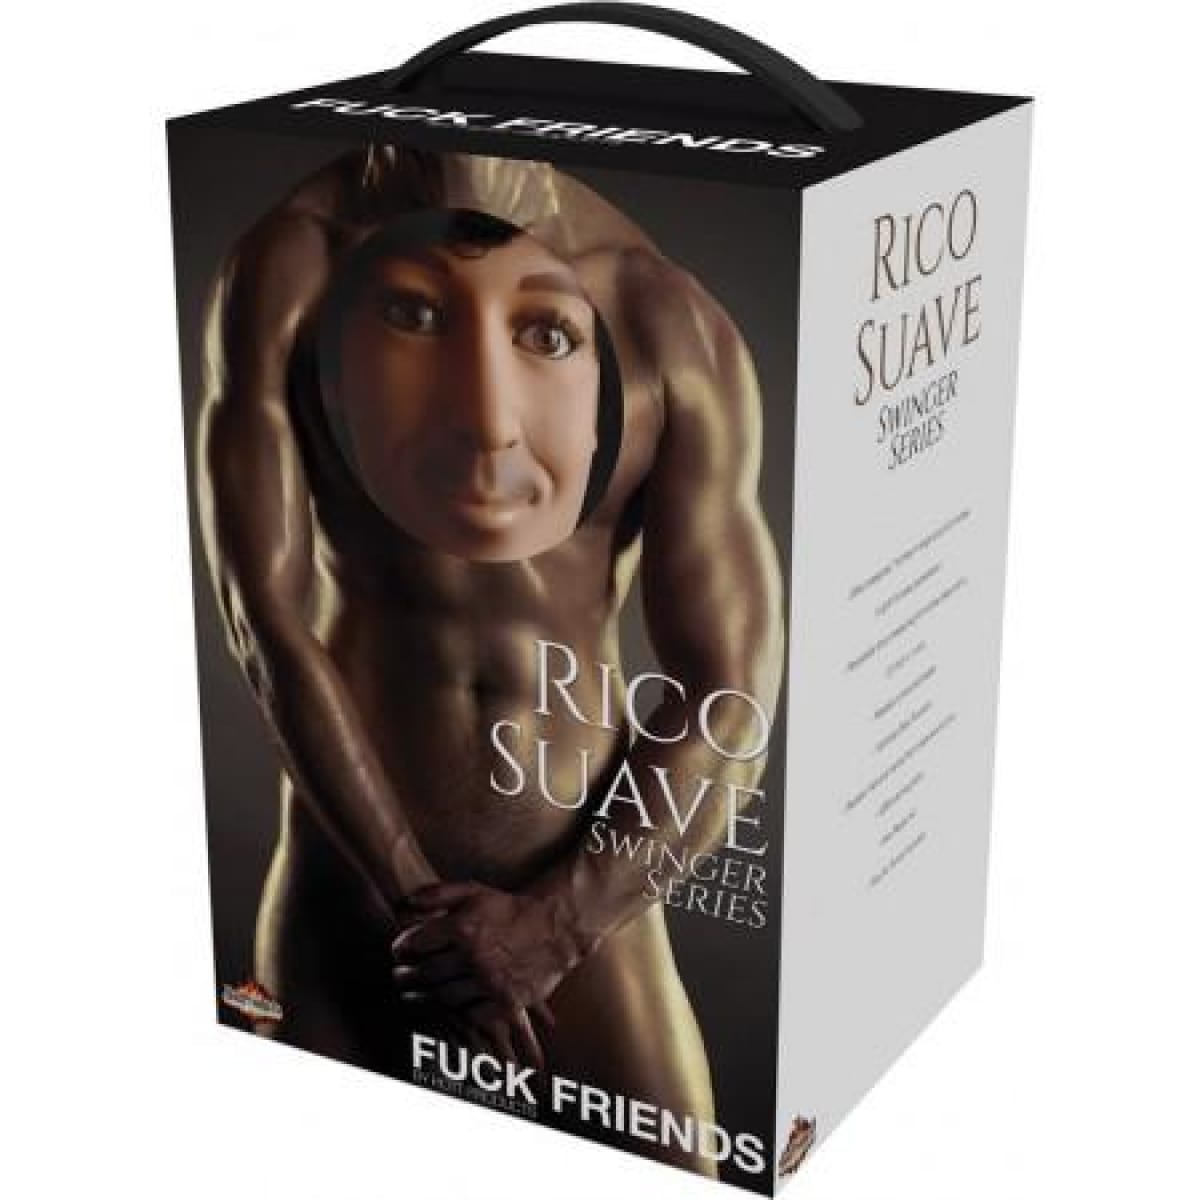 Fuck Friends Rico Suave Swinger Series Doll Intimates Adult Boutique